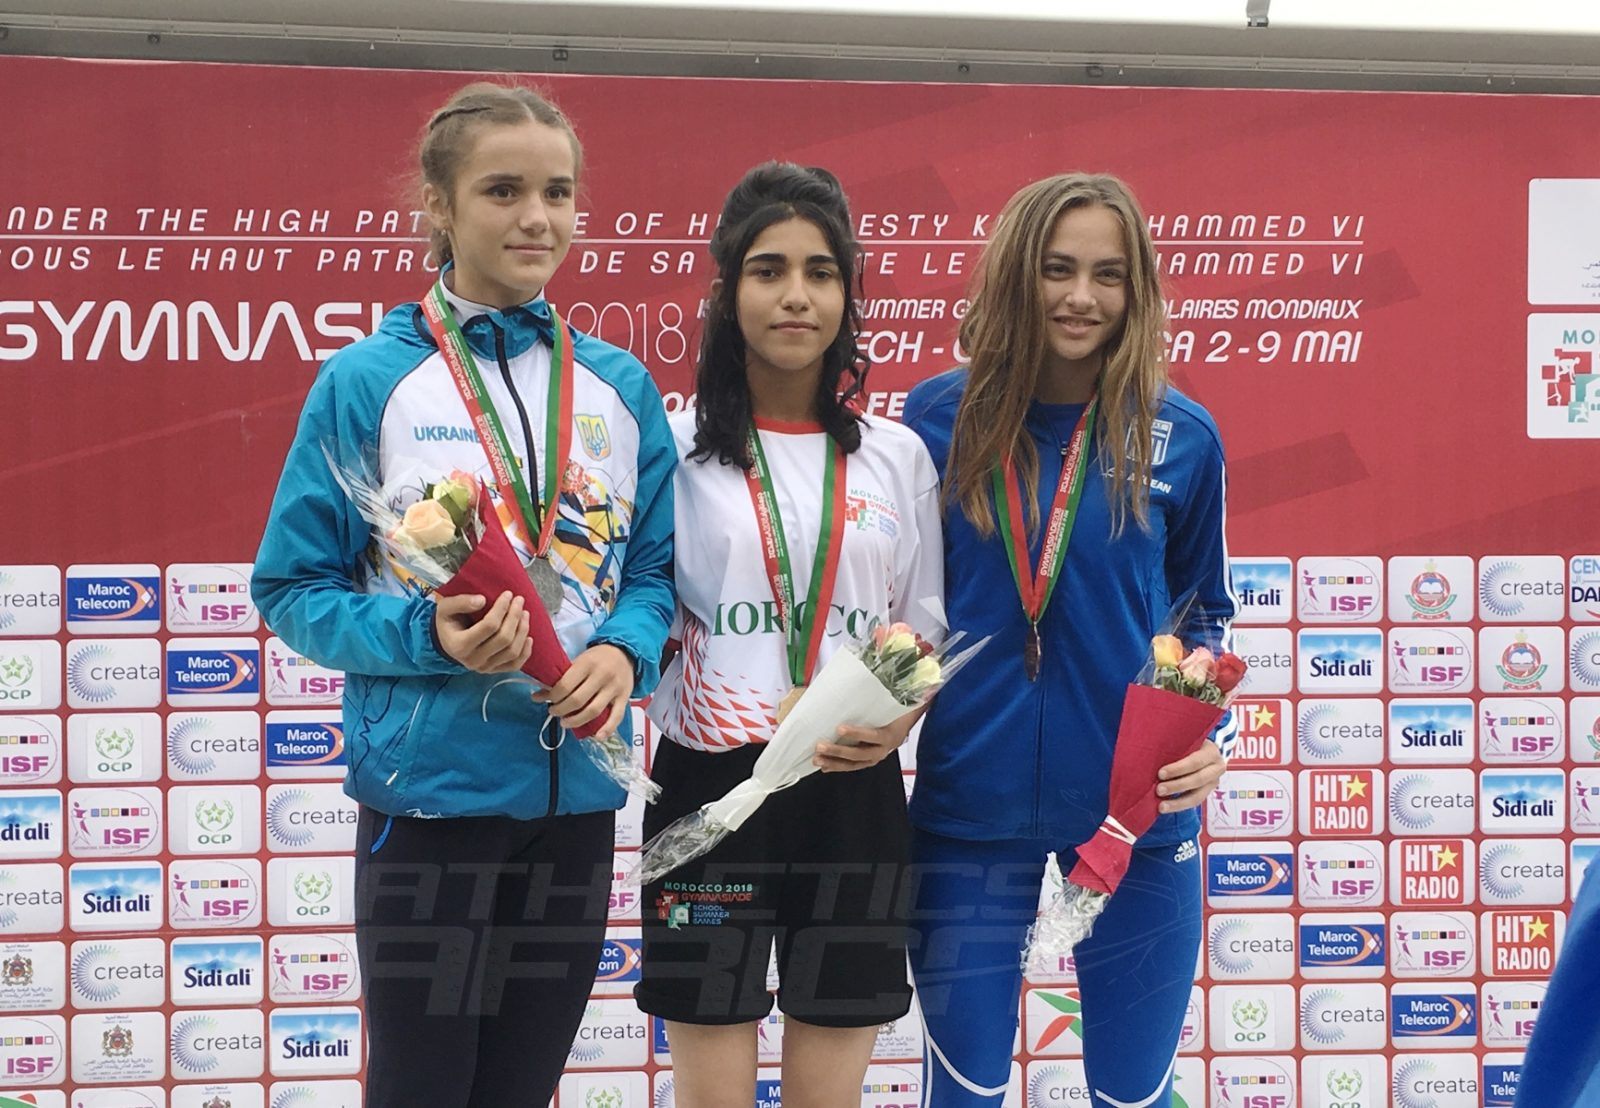 Morocco's Chaimae Arrouf (C) flanked by Svitlana Zhulzhyk of Ukraine and Ioanna Panapoulou of Greece on the podium after the Girls 800m medal presentation at Gymnasiade 2018 in Marrakech / Photo Credit: Yomi Omogbeja